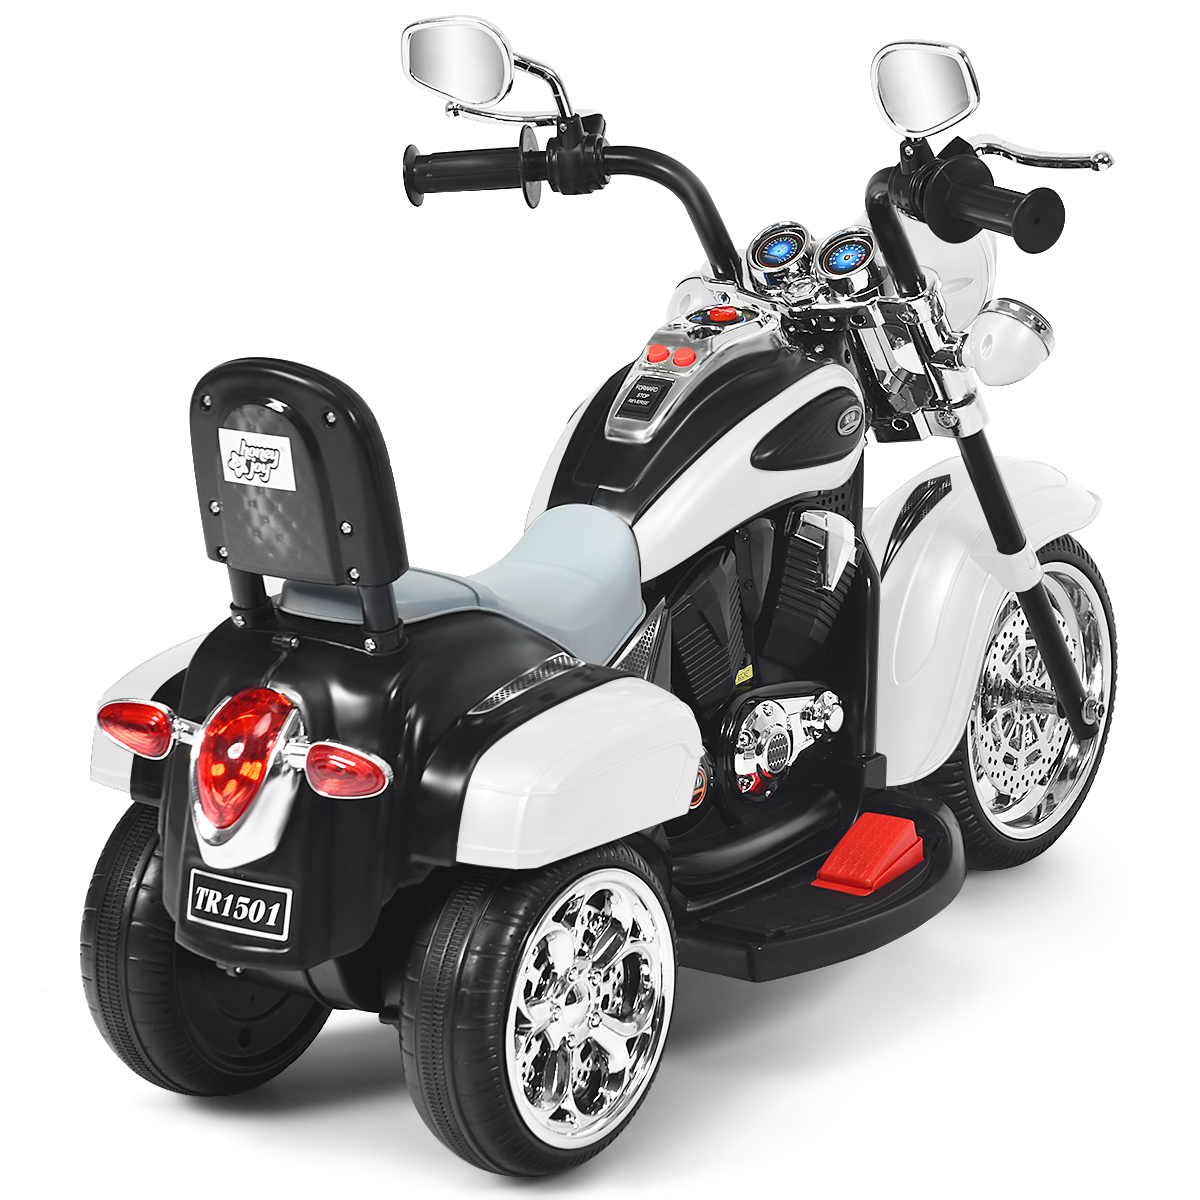 Costway 3 Wheel Kids Ride On Motorcycle 6V Battery Powered Electric Toy White - image 3 of 7